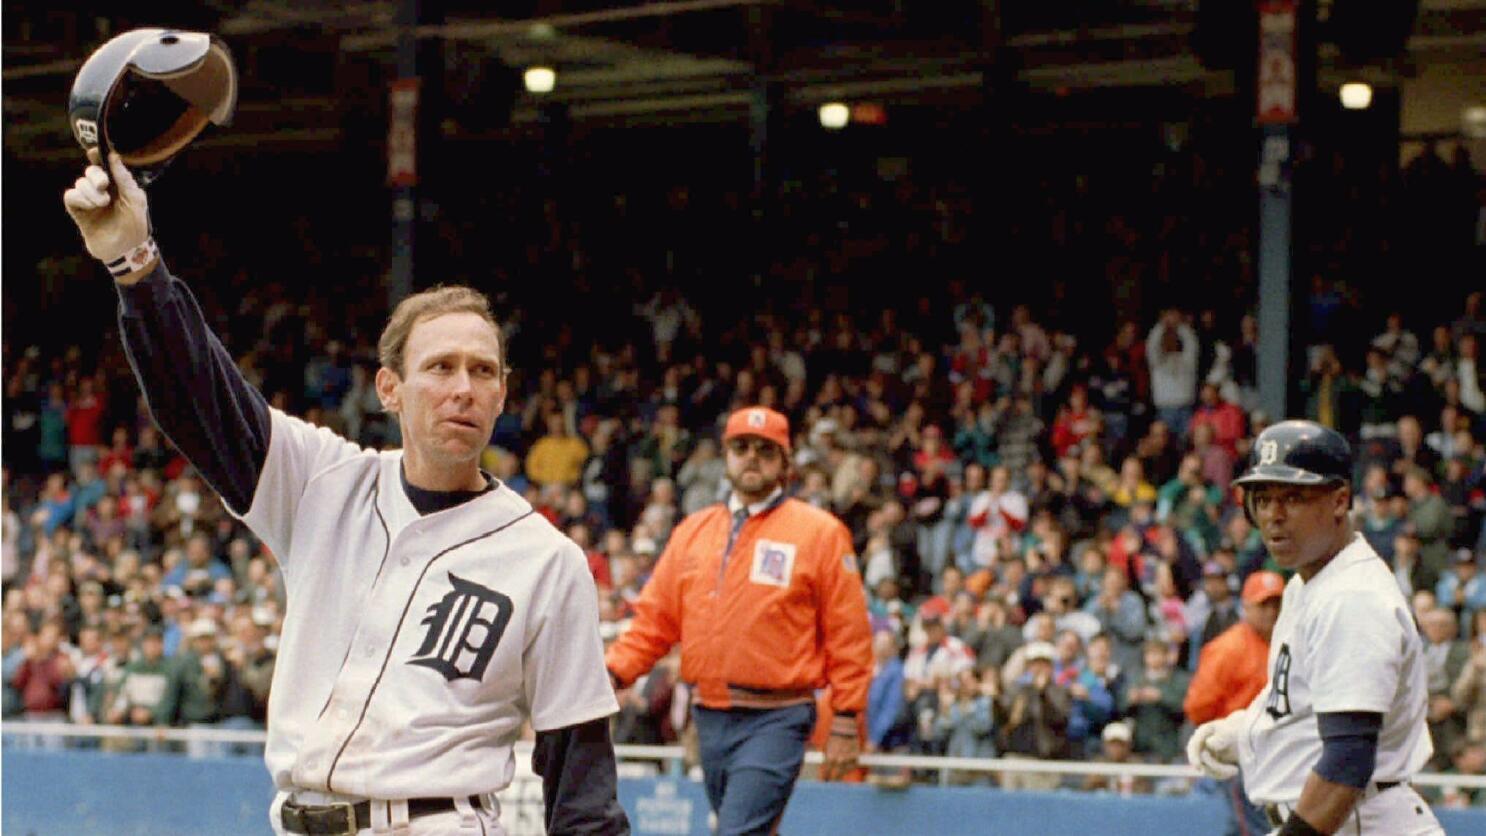 Ex-Kearny High star Alan Trammell voted into Baseball Hall of Fame